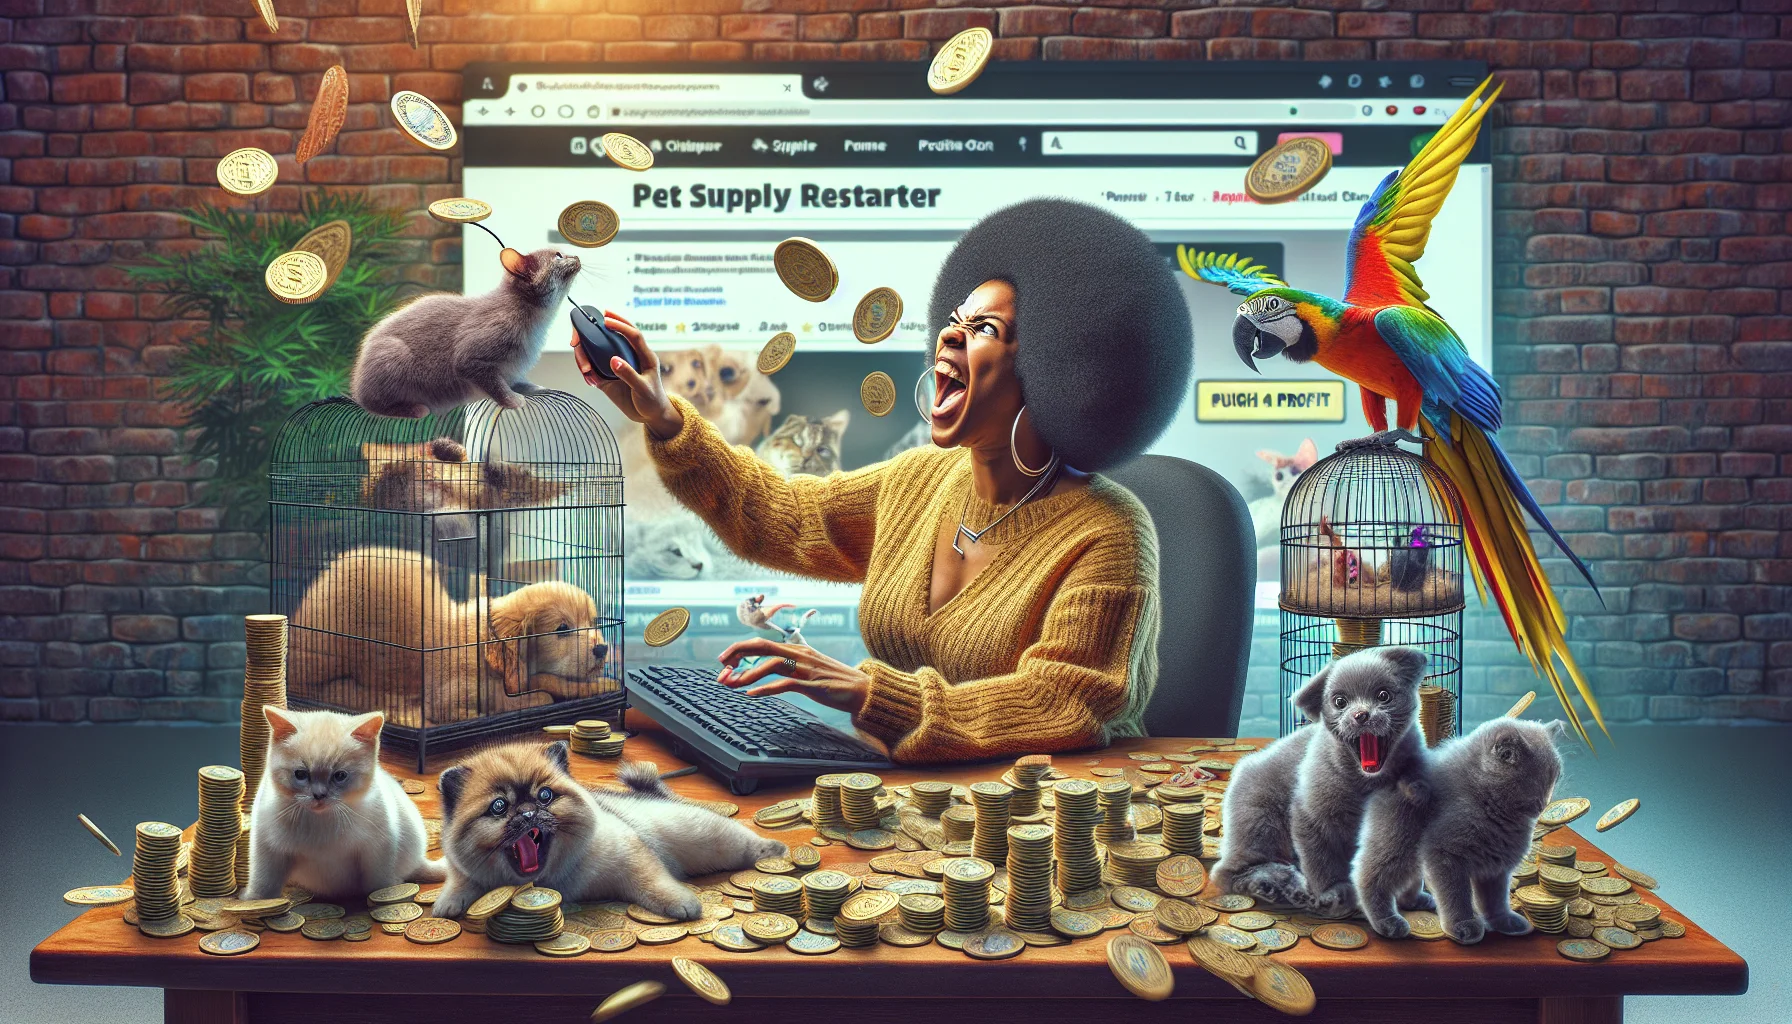 Create a humorous realism-based image presenting a fictional pet supply retailer, reminiscent of a typical American brick-and-mortar and online pet store. This scene features a furiously typing African-American woman at her desk, immersed in online activities against the backdrop of a website running a high-profit affiliate program. A calculated mountain of digital coins signifies the profit being made in the foreground. Multiple pets, including a tabby cat playing with a mouse toy, a golden retriever chewing on a tennis ball, and a parrot with multicolor feathers perched on the chair, add a lightheartedness to the atmospheric scene.